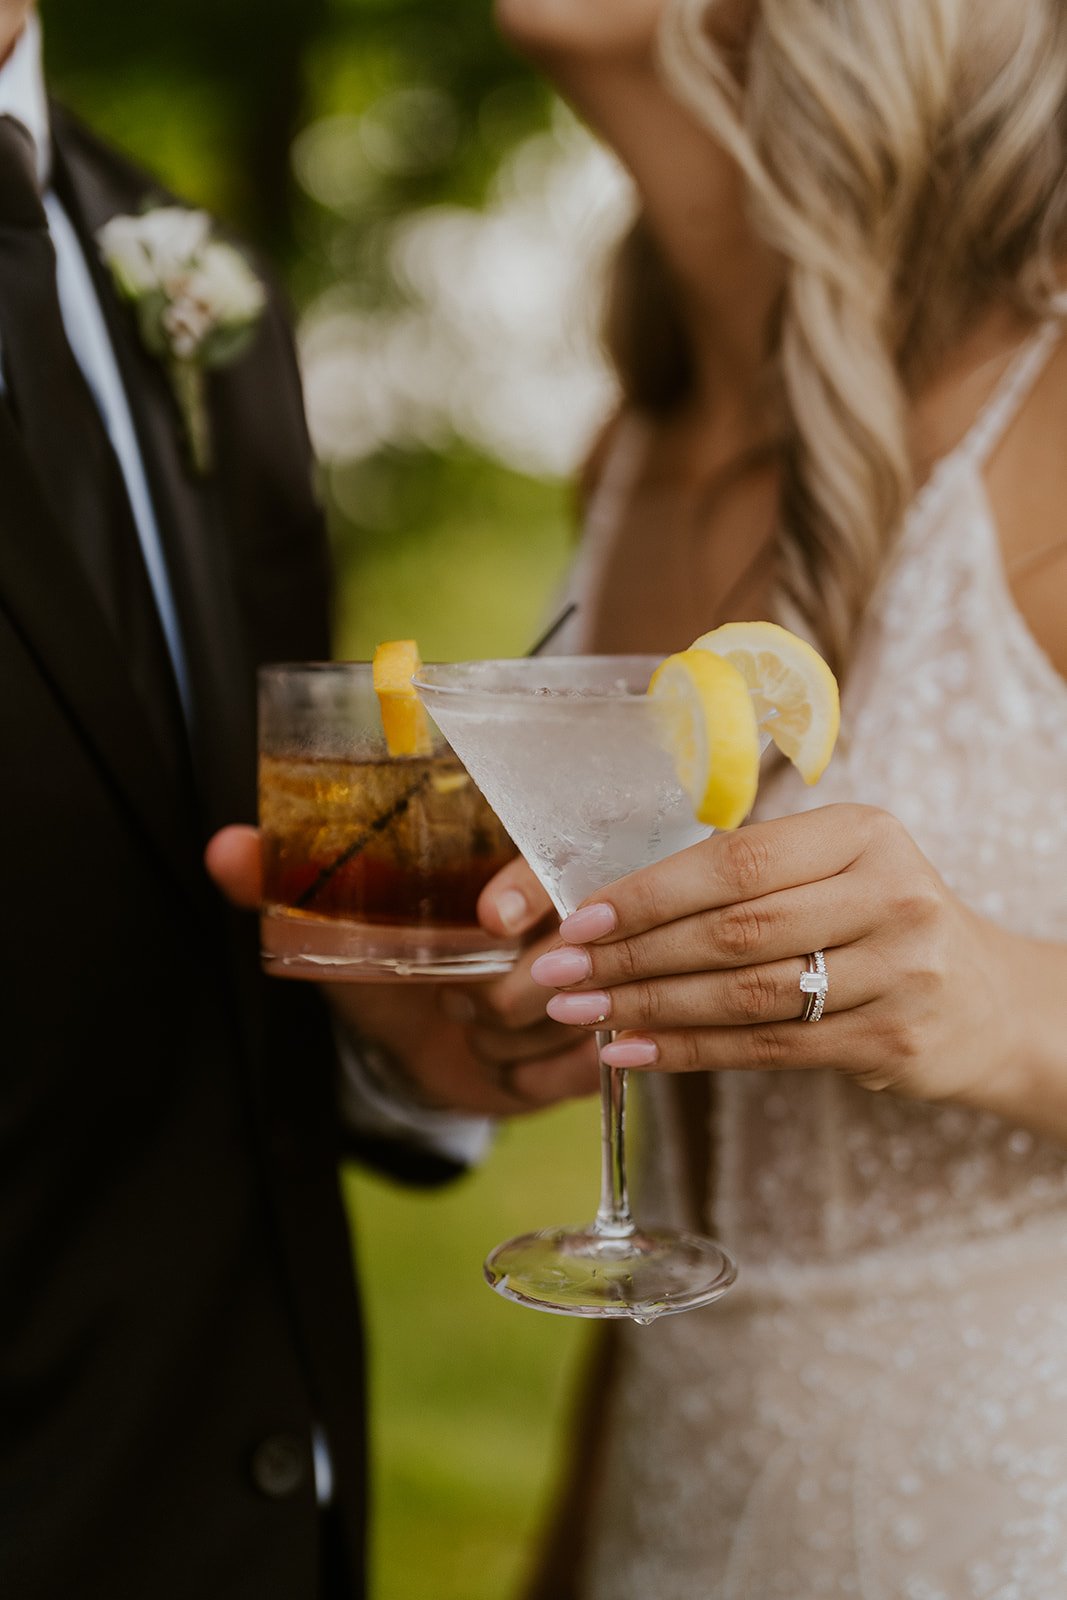 The couple share their first cocktail together as husband and wife. 